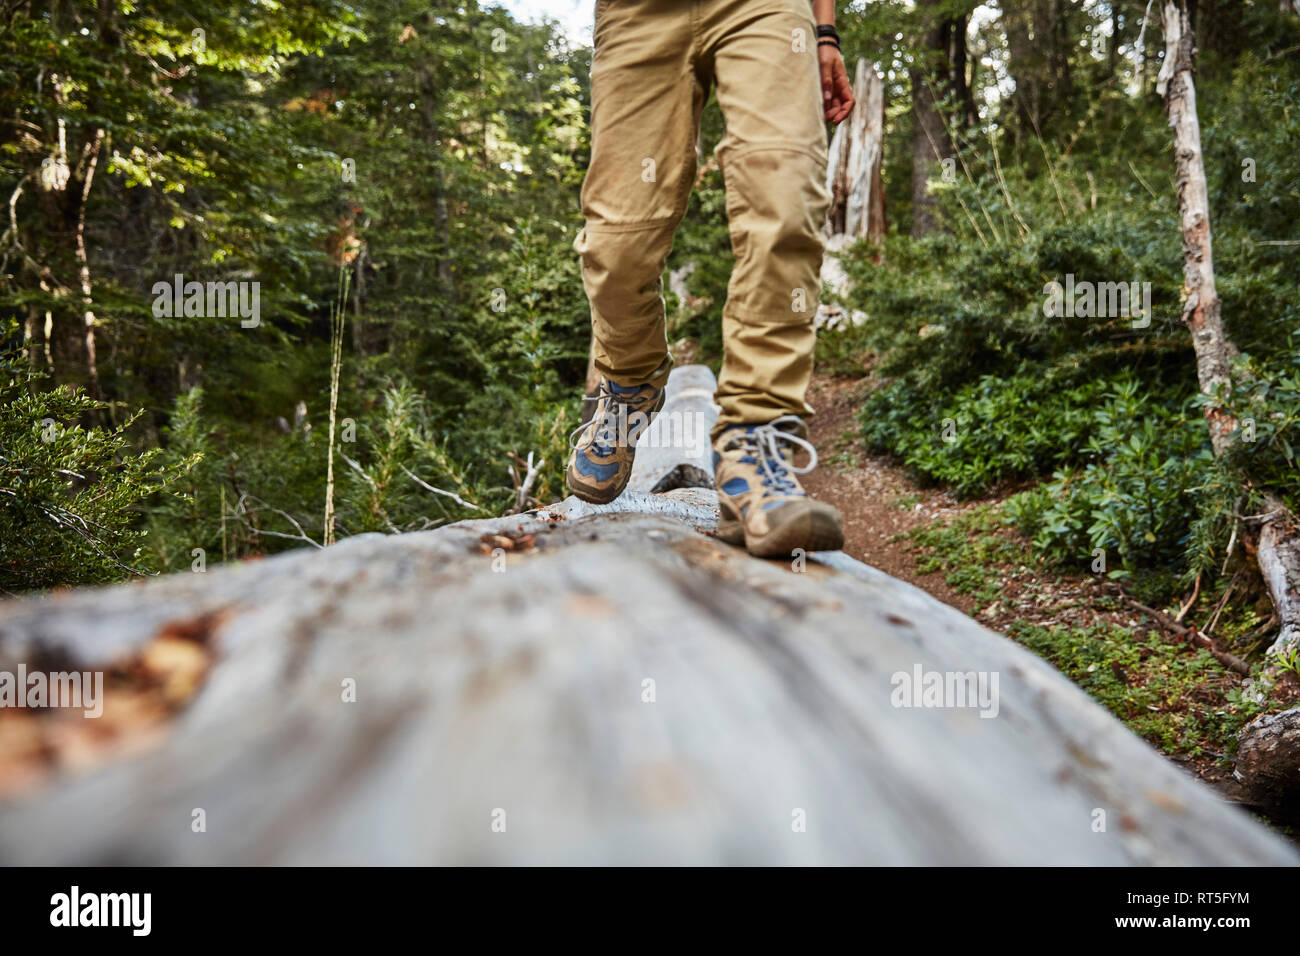 Chile, Puren, Nahuelbuta National Park, close-up of boy walking on a tree trunk in forest Stock Photo